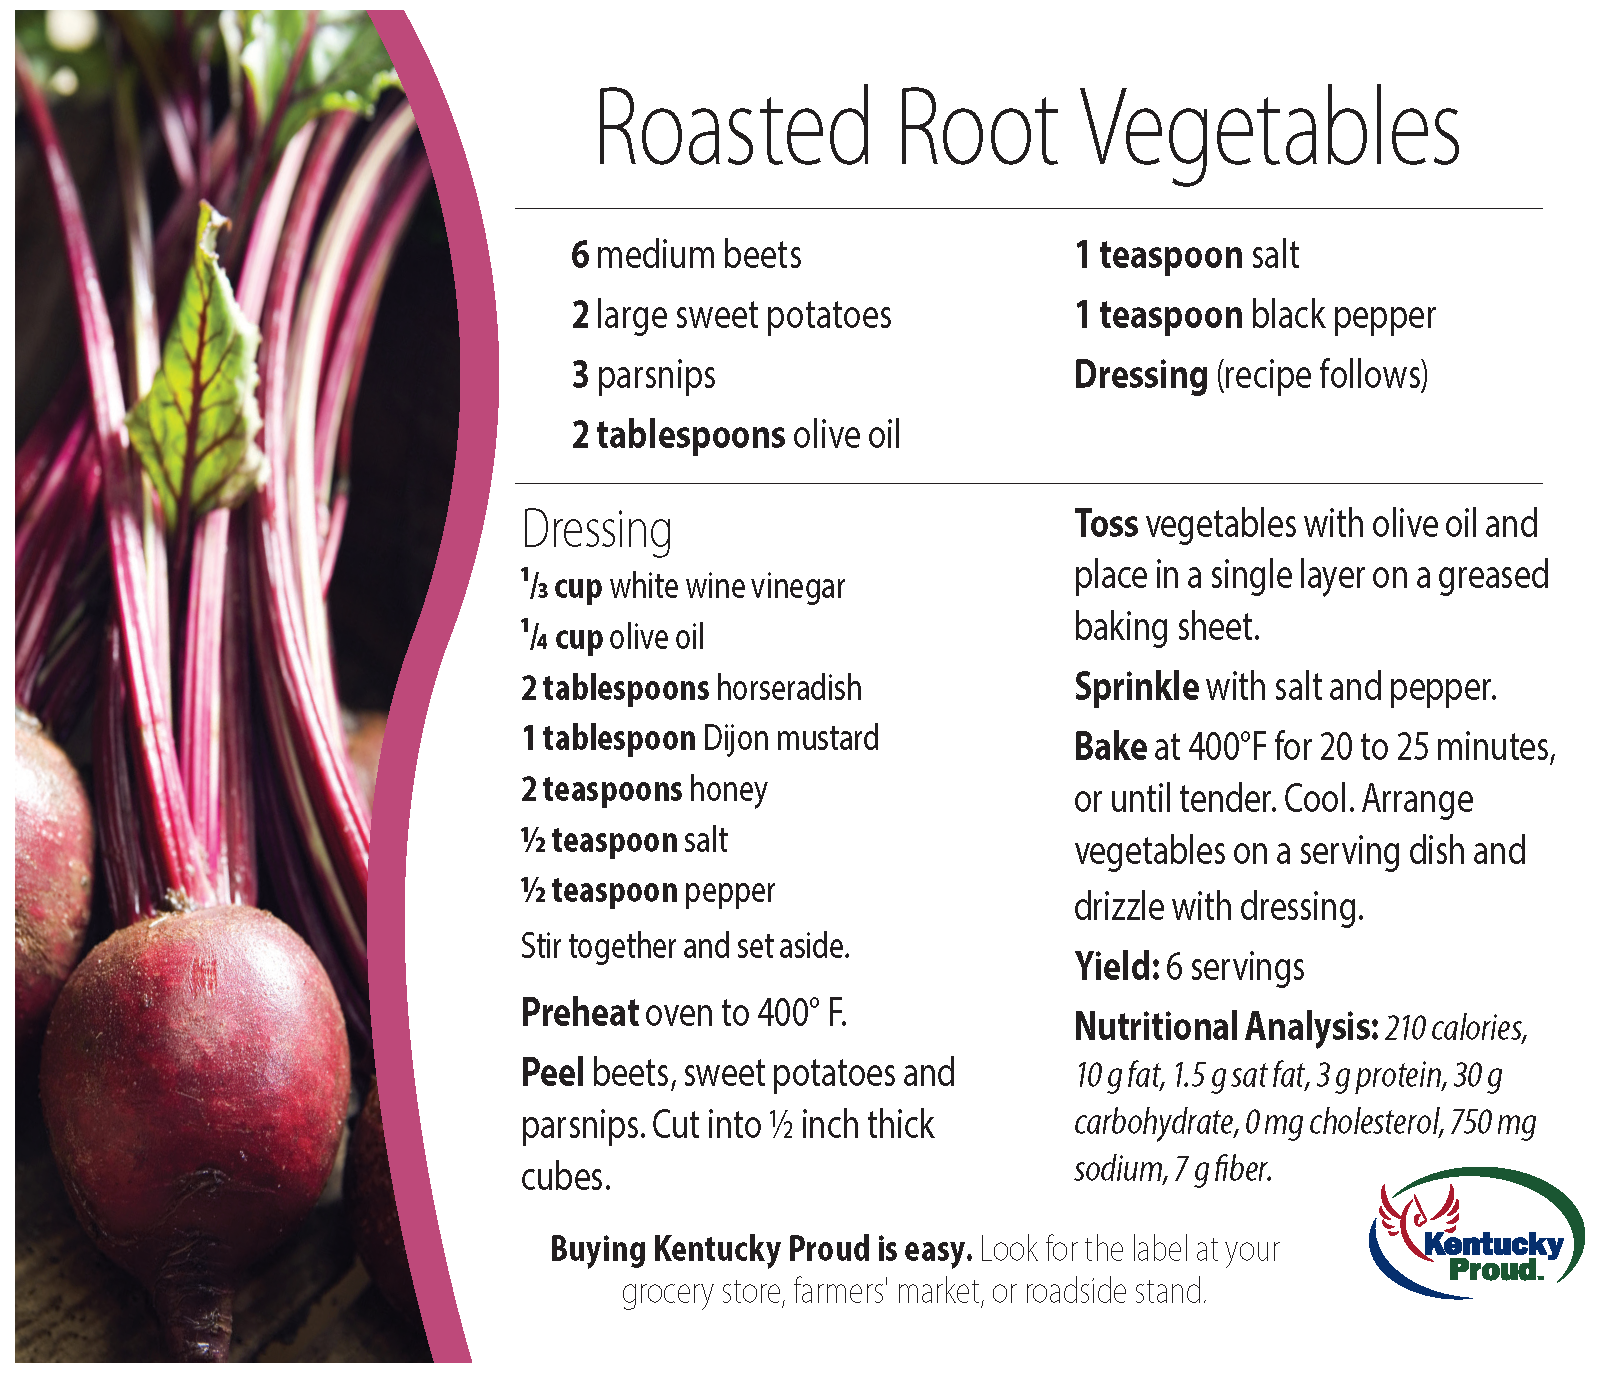 Roasted Root Vegetables recipe card from Plate It Up Kentucky Proud